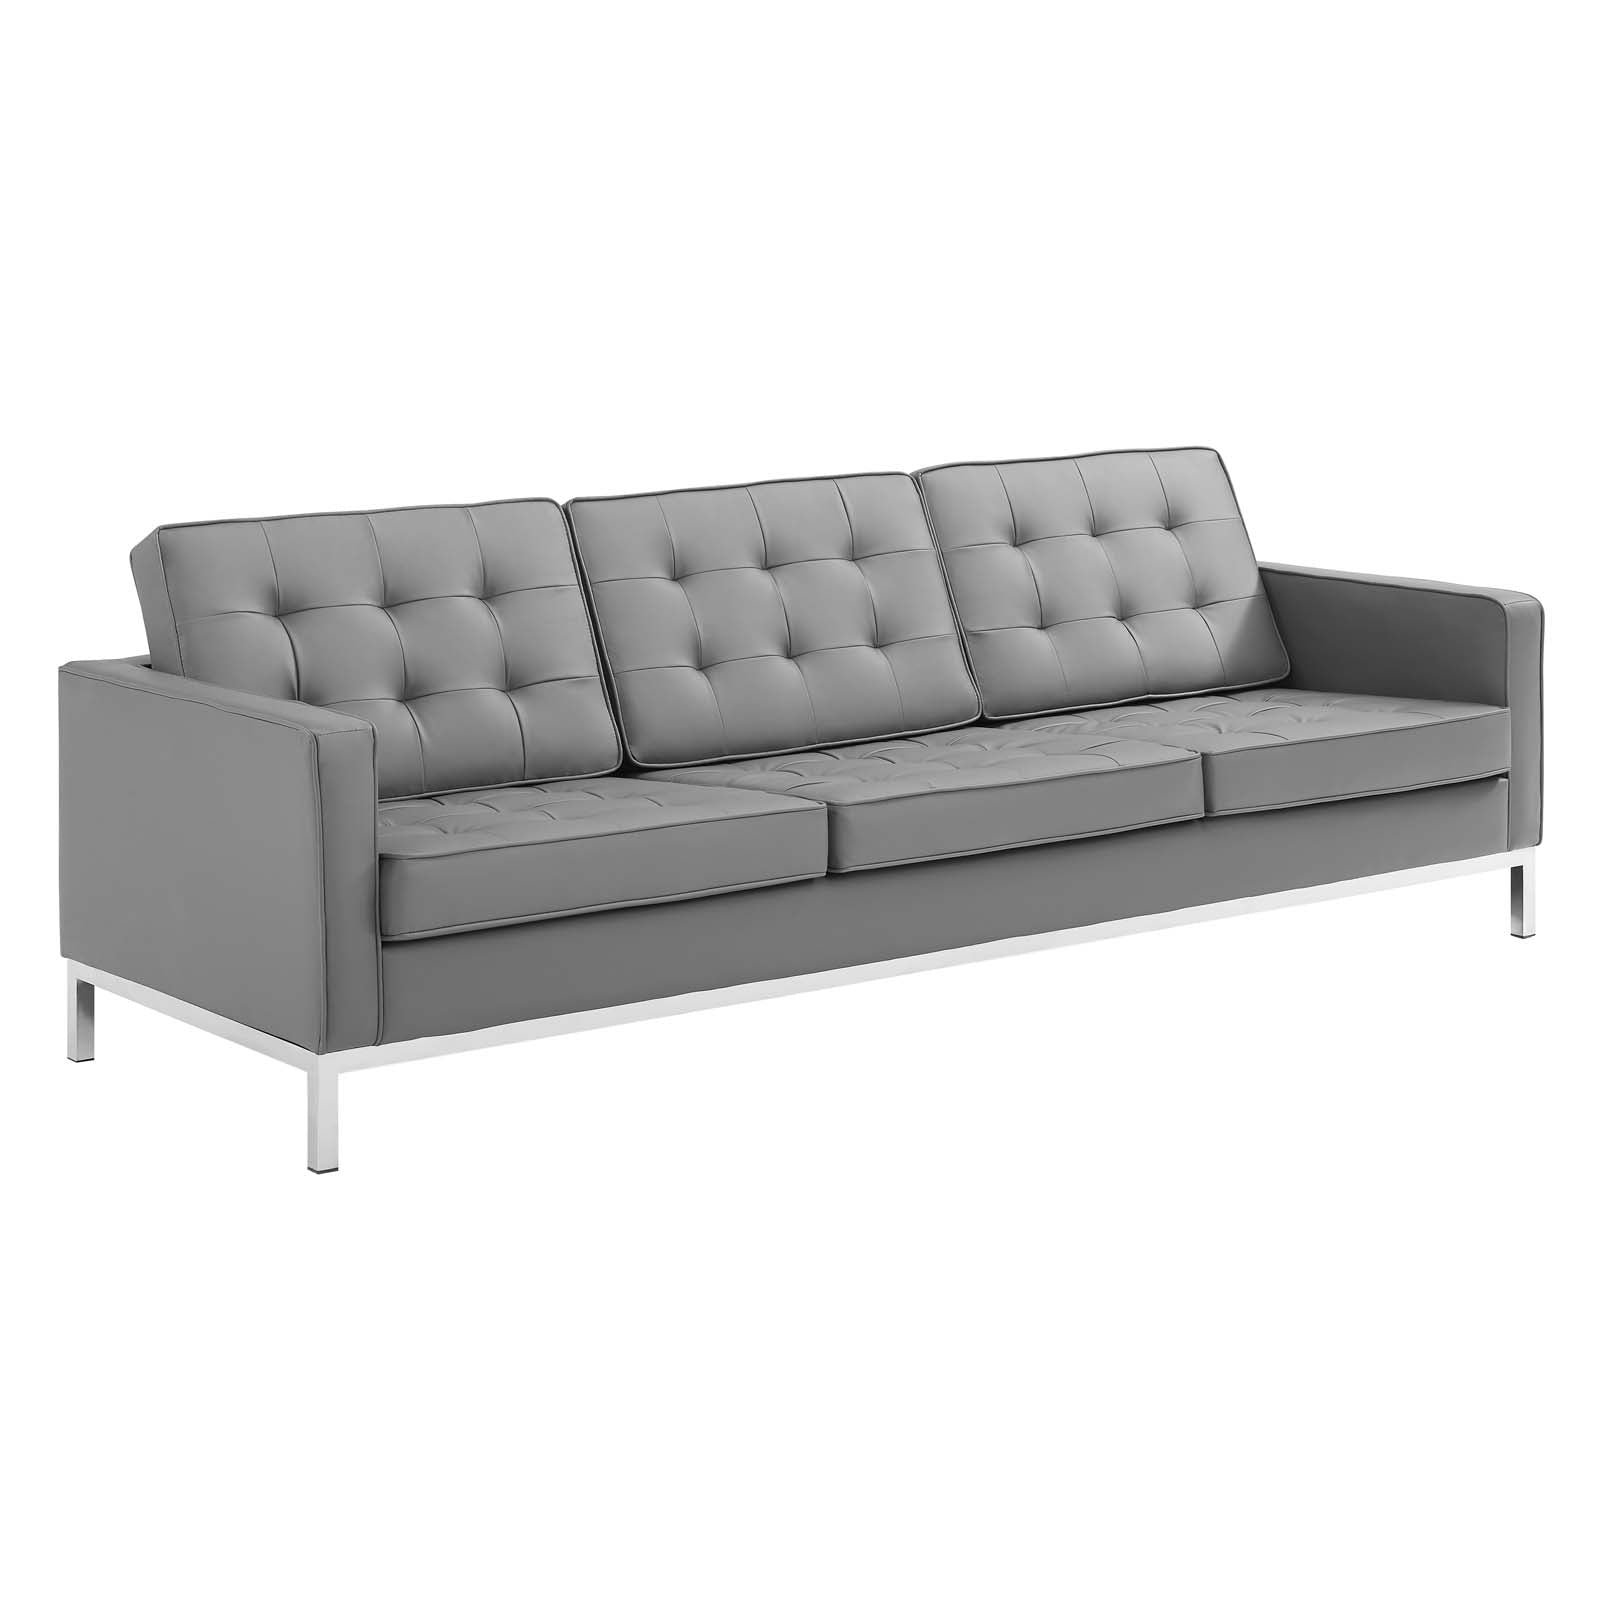 Modway Sofas & Couches - Loft-Tufted-Upholstered-Faux-Leather-Sofa-and-Armchair-Set-Silver-Gray